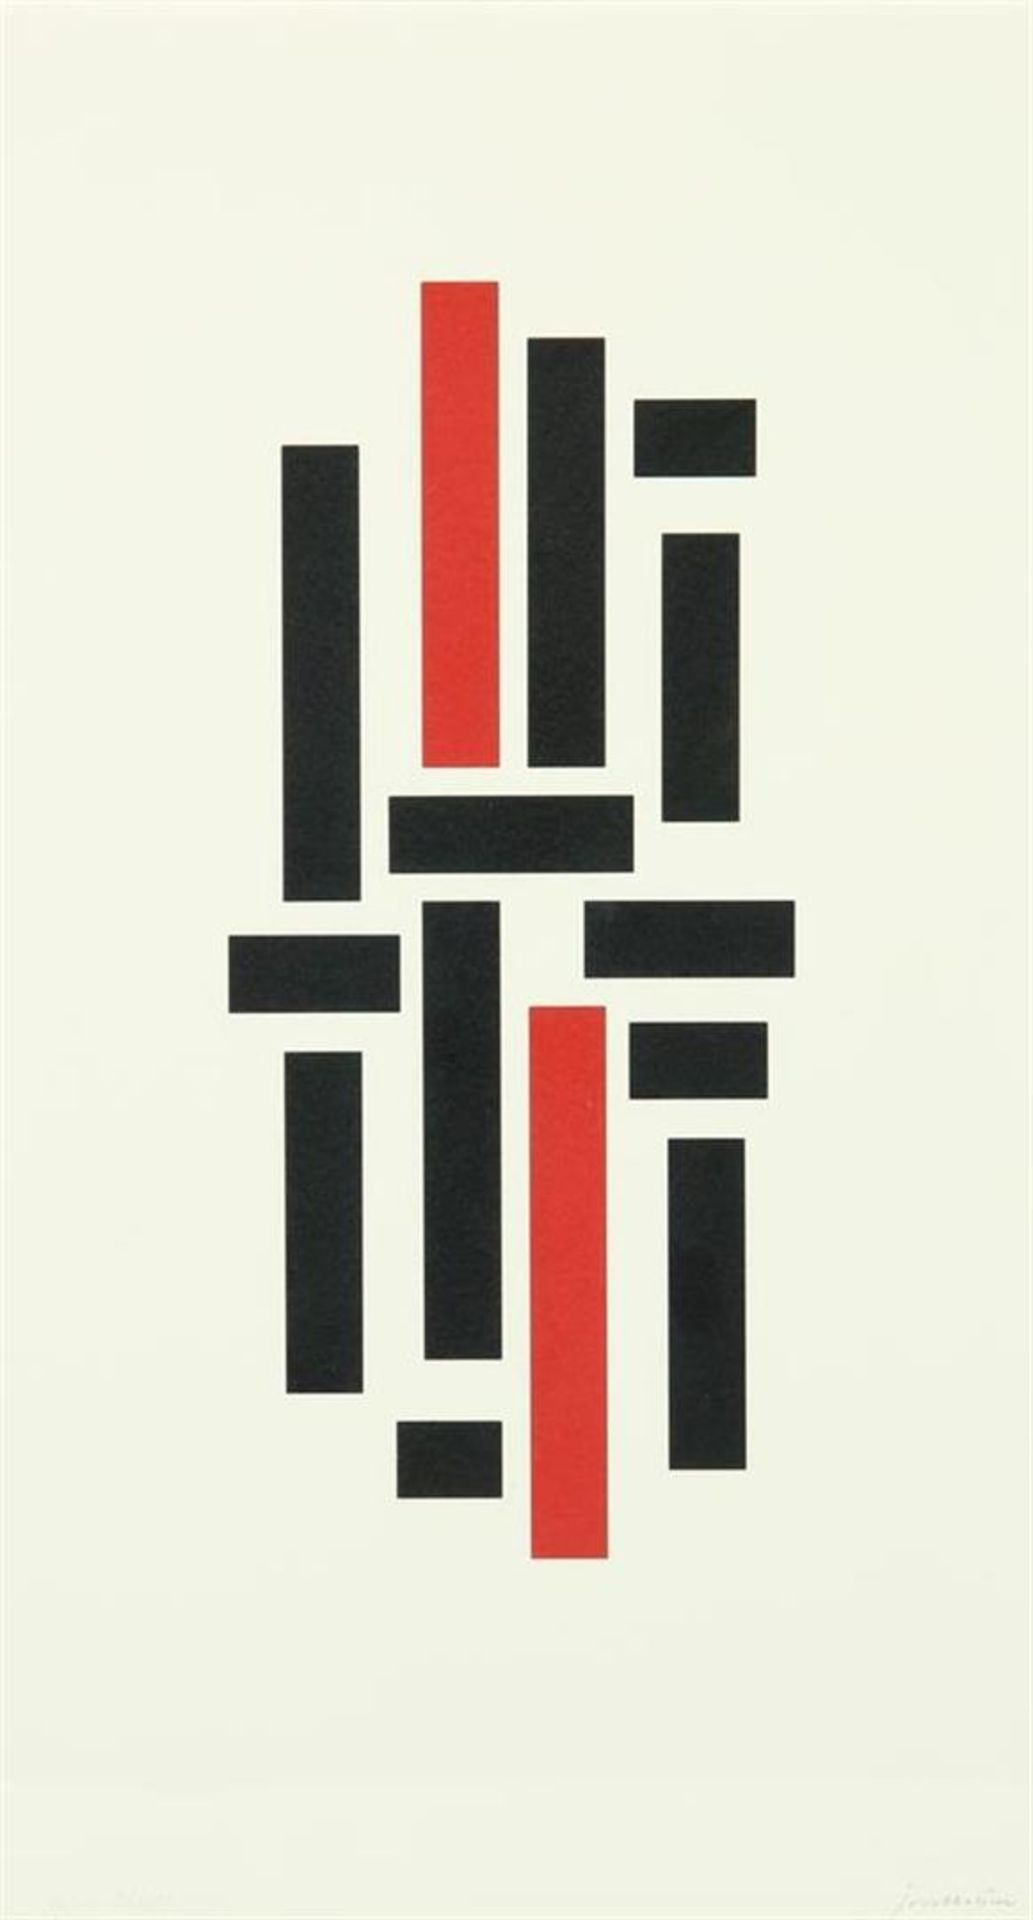 Joost Baljeu (1925-1991) 'Light space' composition in black/red, signed lower right, dated 1959/87